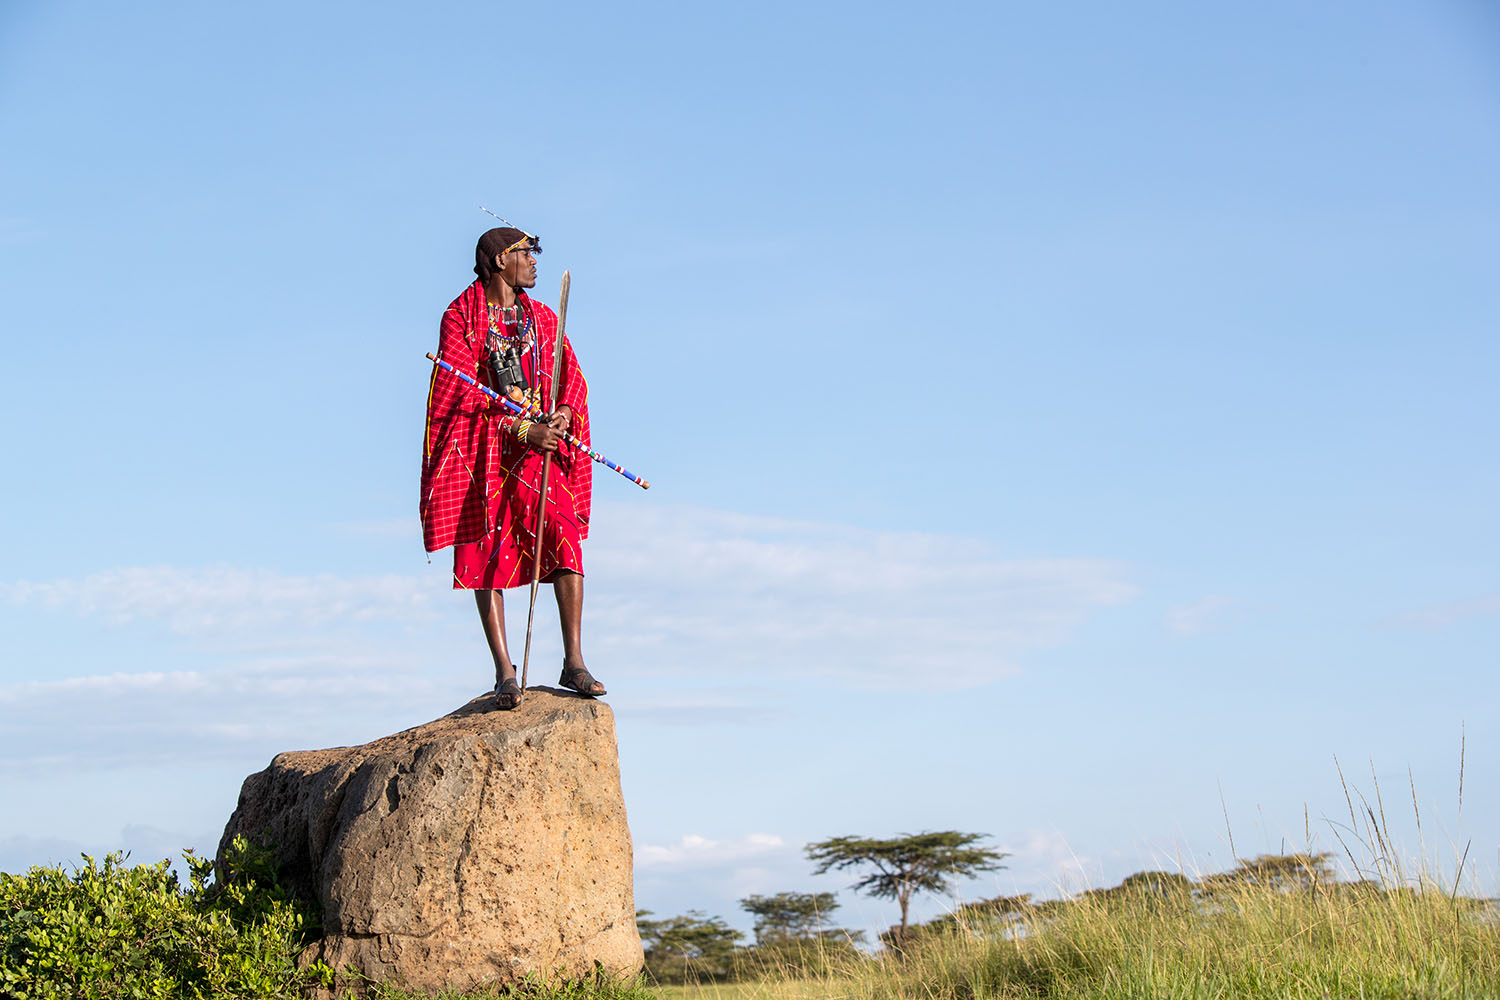 Above: Maasai warrior, Fred, captured beautifully by Klaus in 2018